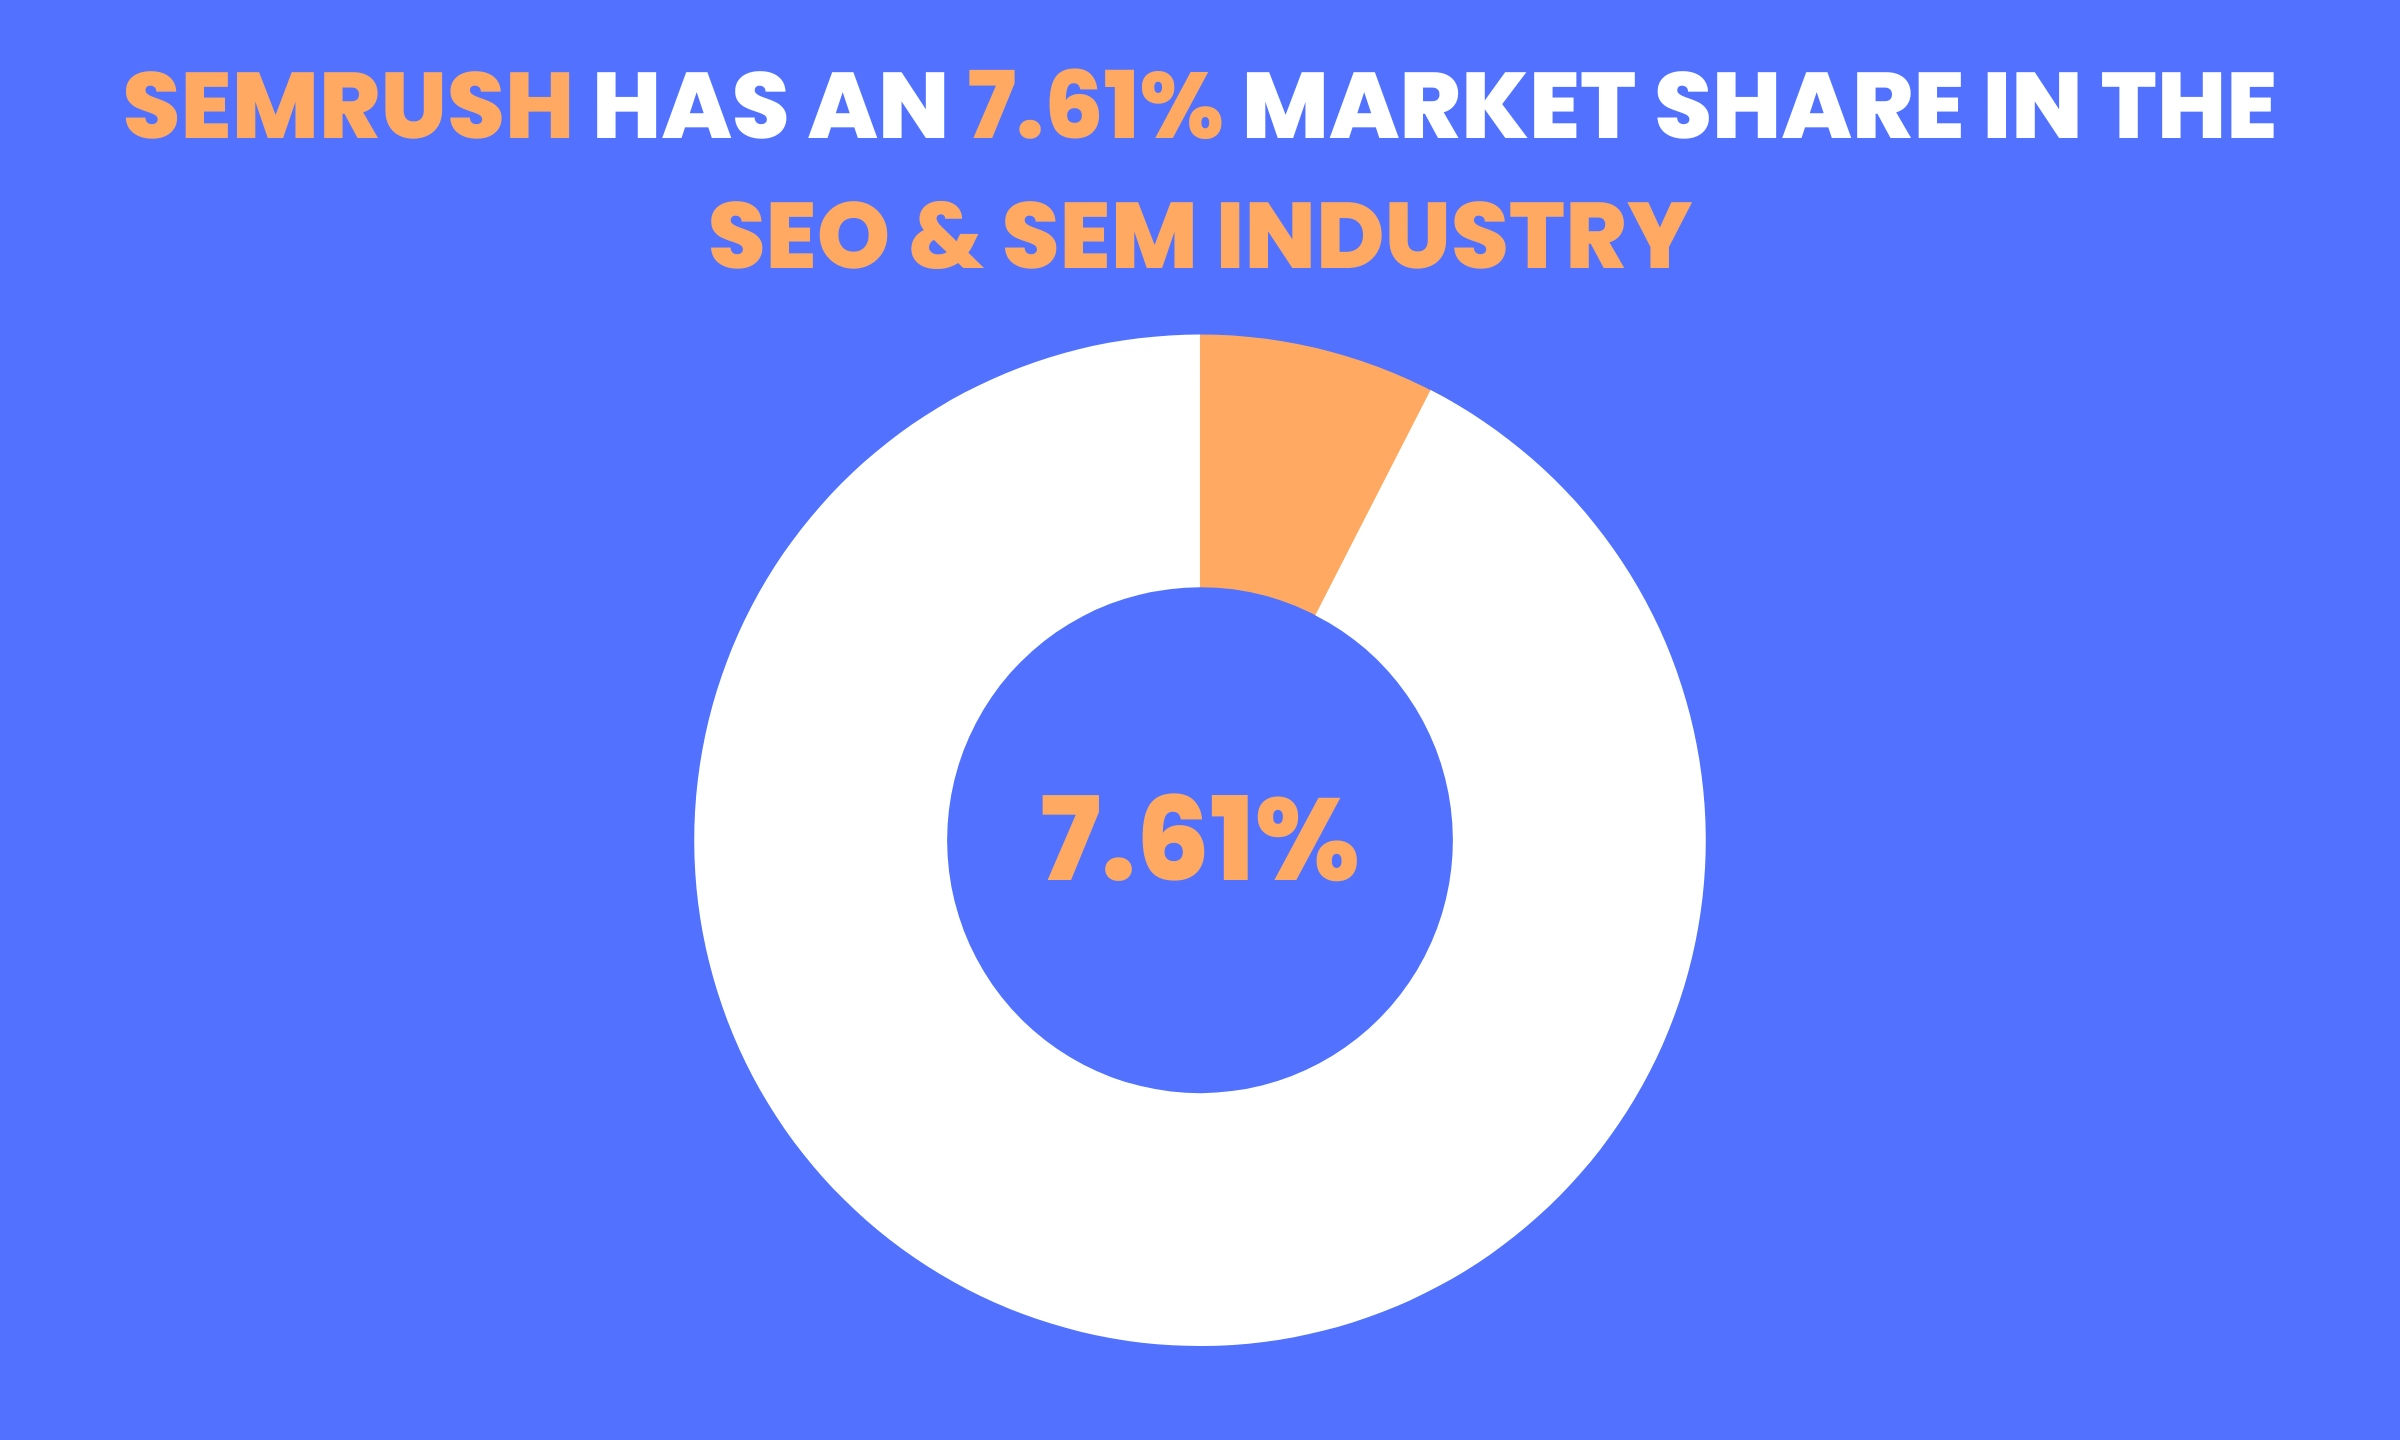 SEMRush's Market Share being 7.61% compared to the rest of the SEO and SEM industry